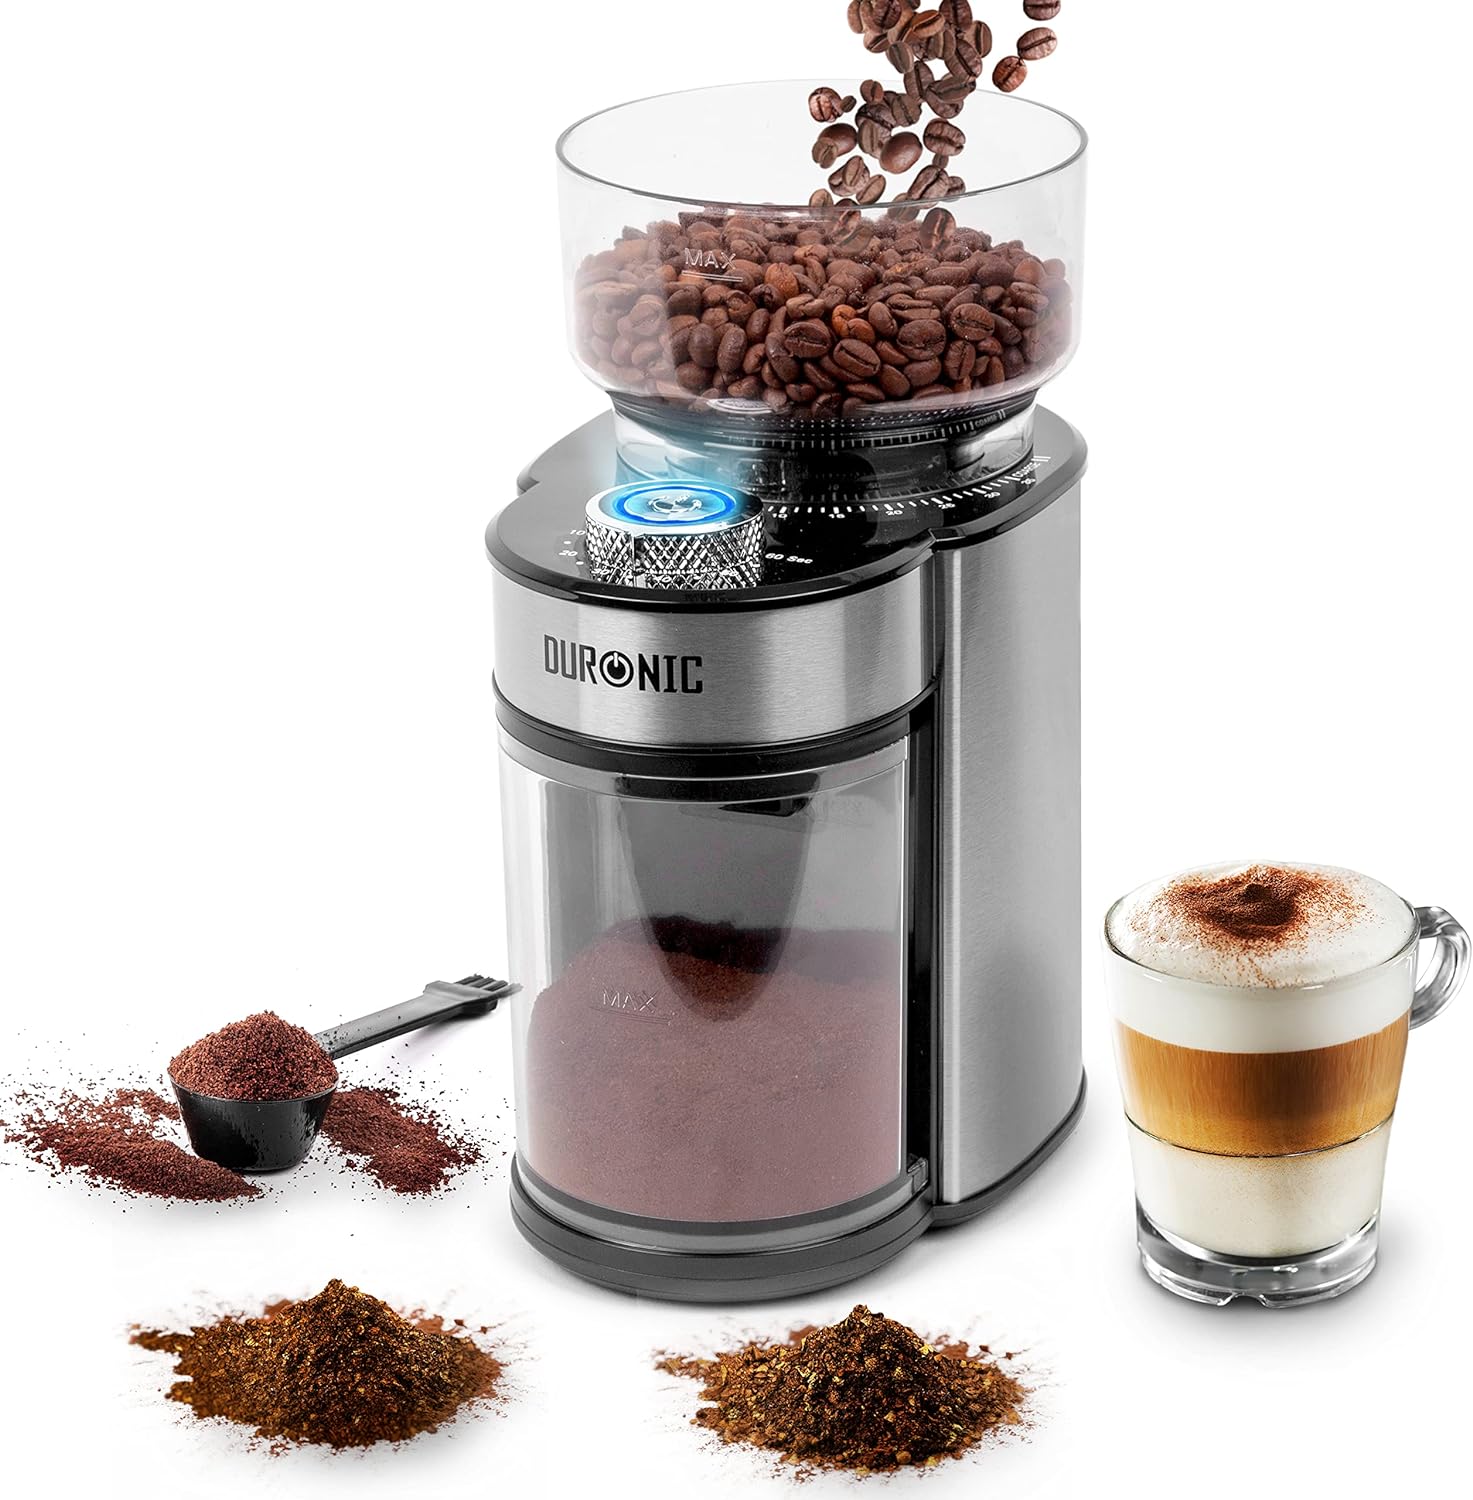 Duronic BG200 Electric Cone Mill, 200 W Coffee Grinder with Grinder, 200 g Coffee Beans, Grinding Level from Coarse to Fine, Quantity Dosage Up to 12 Cups of Coffee, Suitable for French Press Café